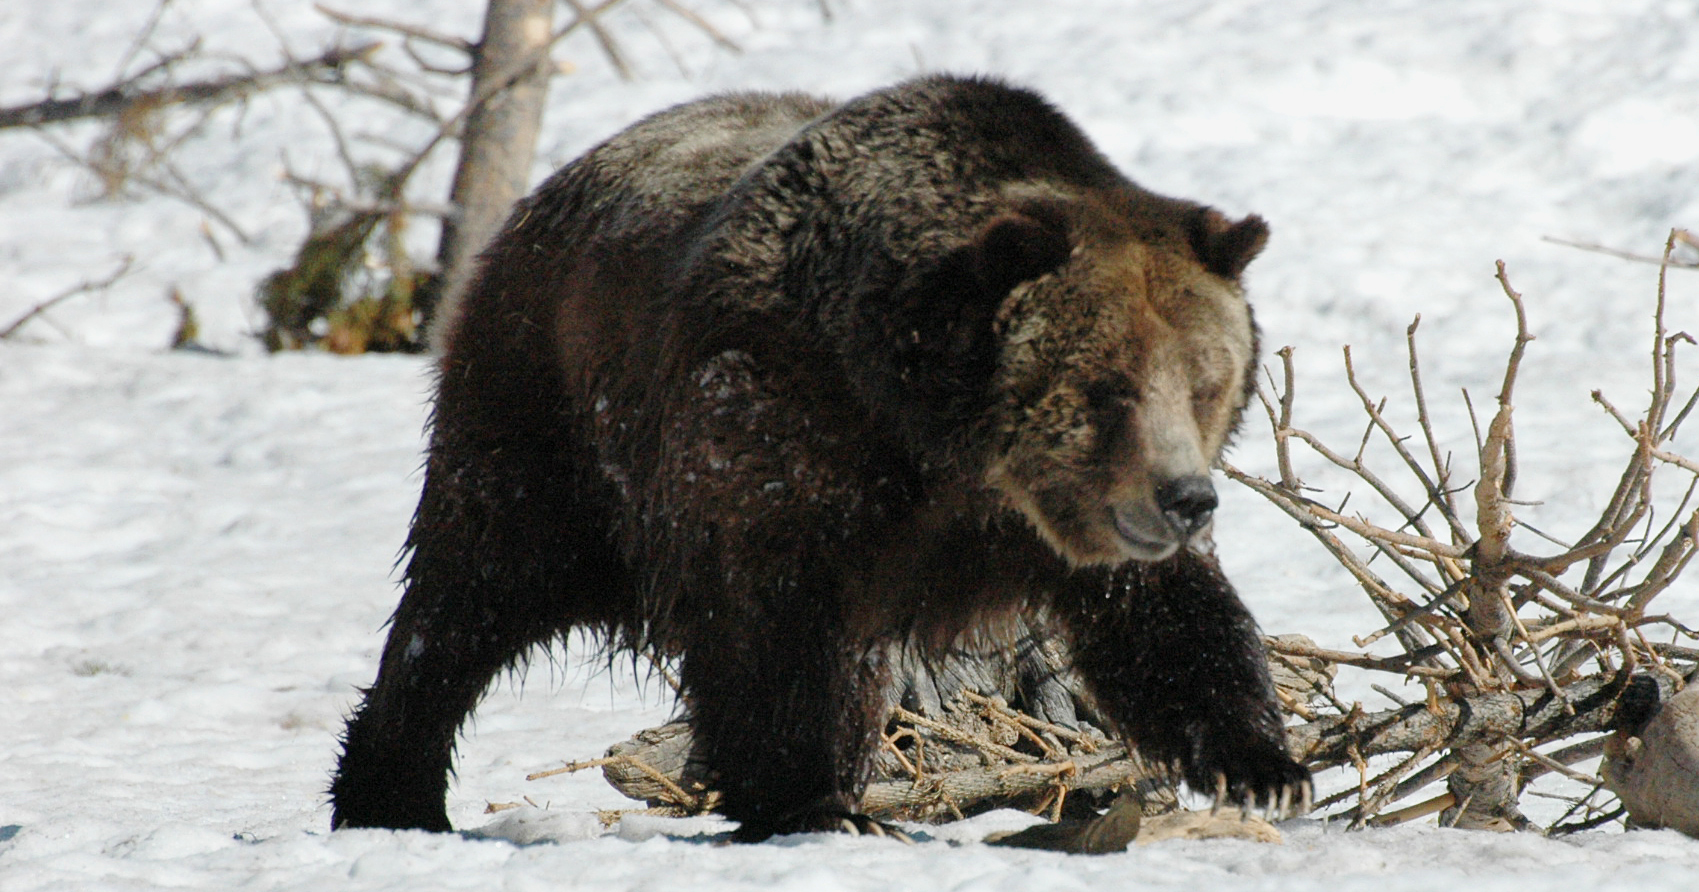 grizzly bear in snow March 2012